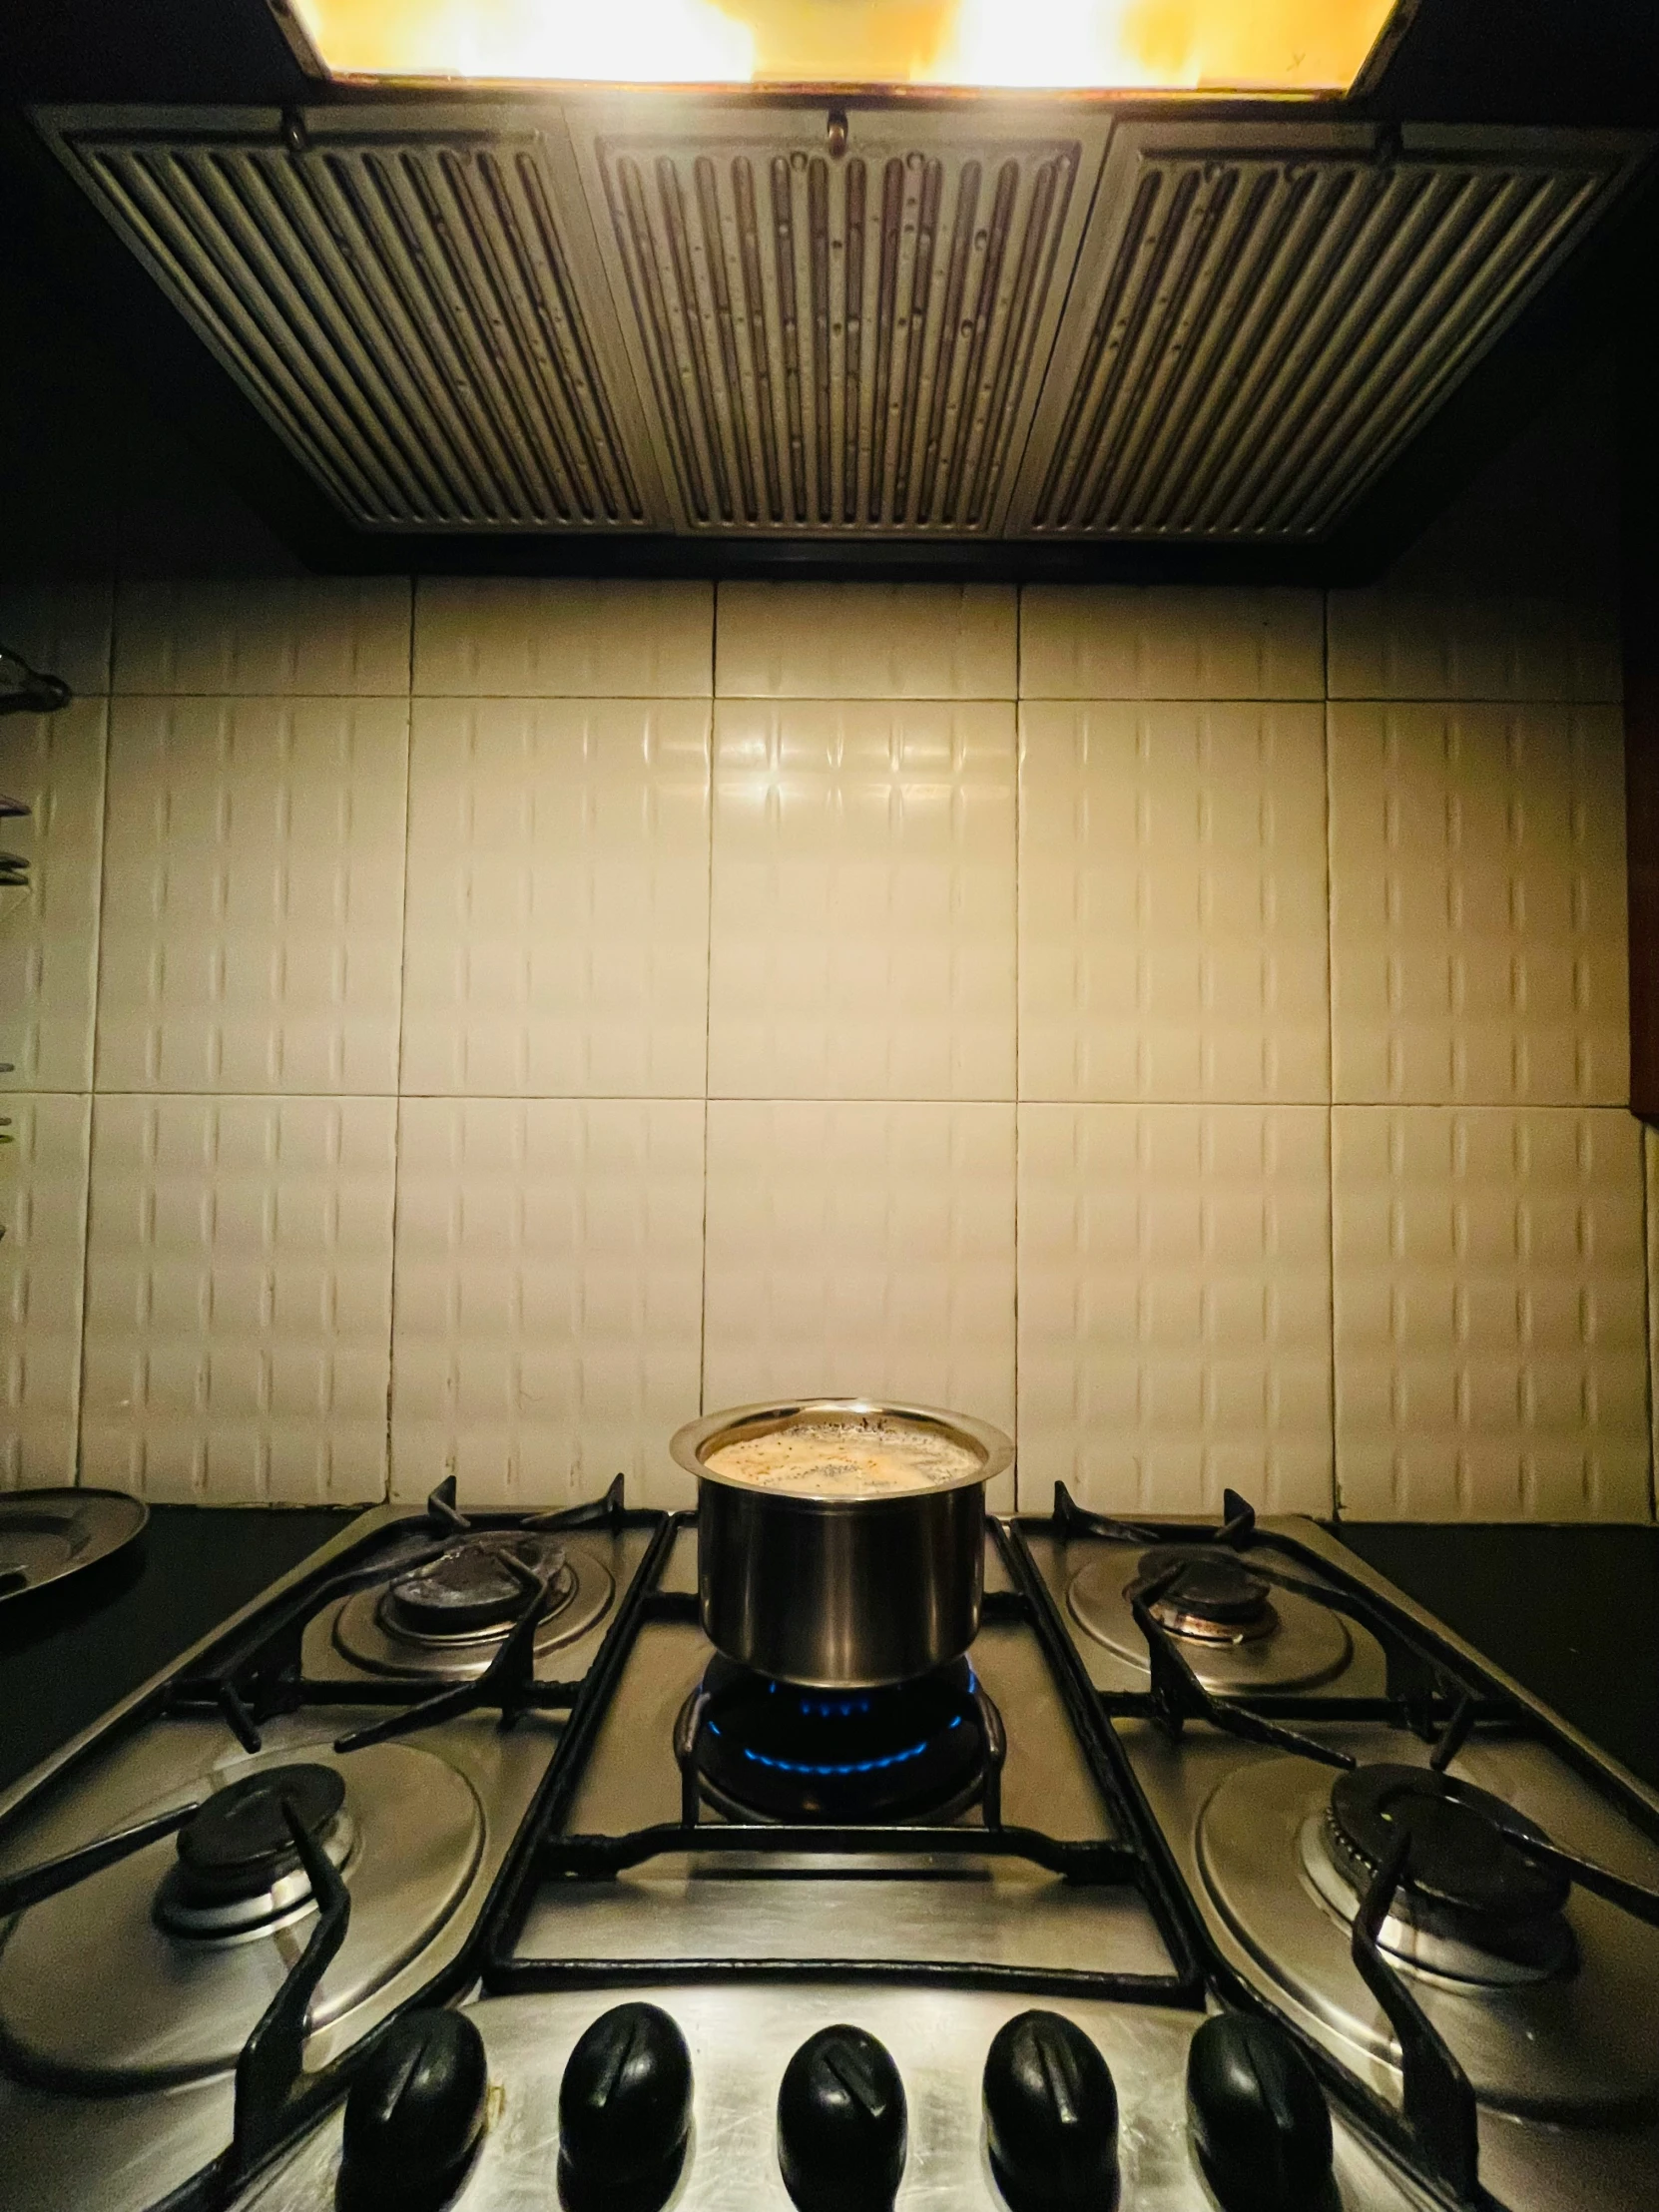 a gas stove top in a kitchen under a microwave